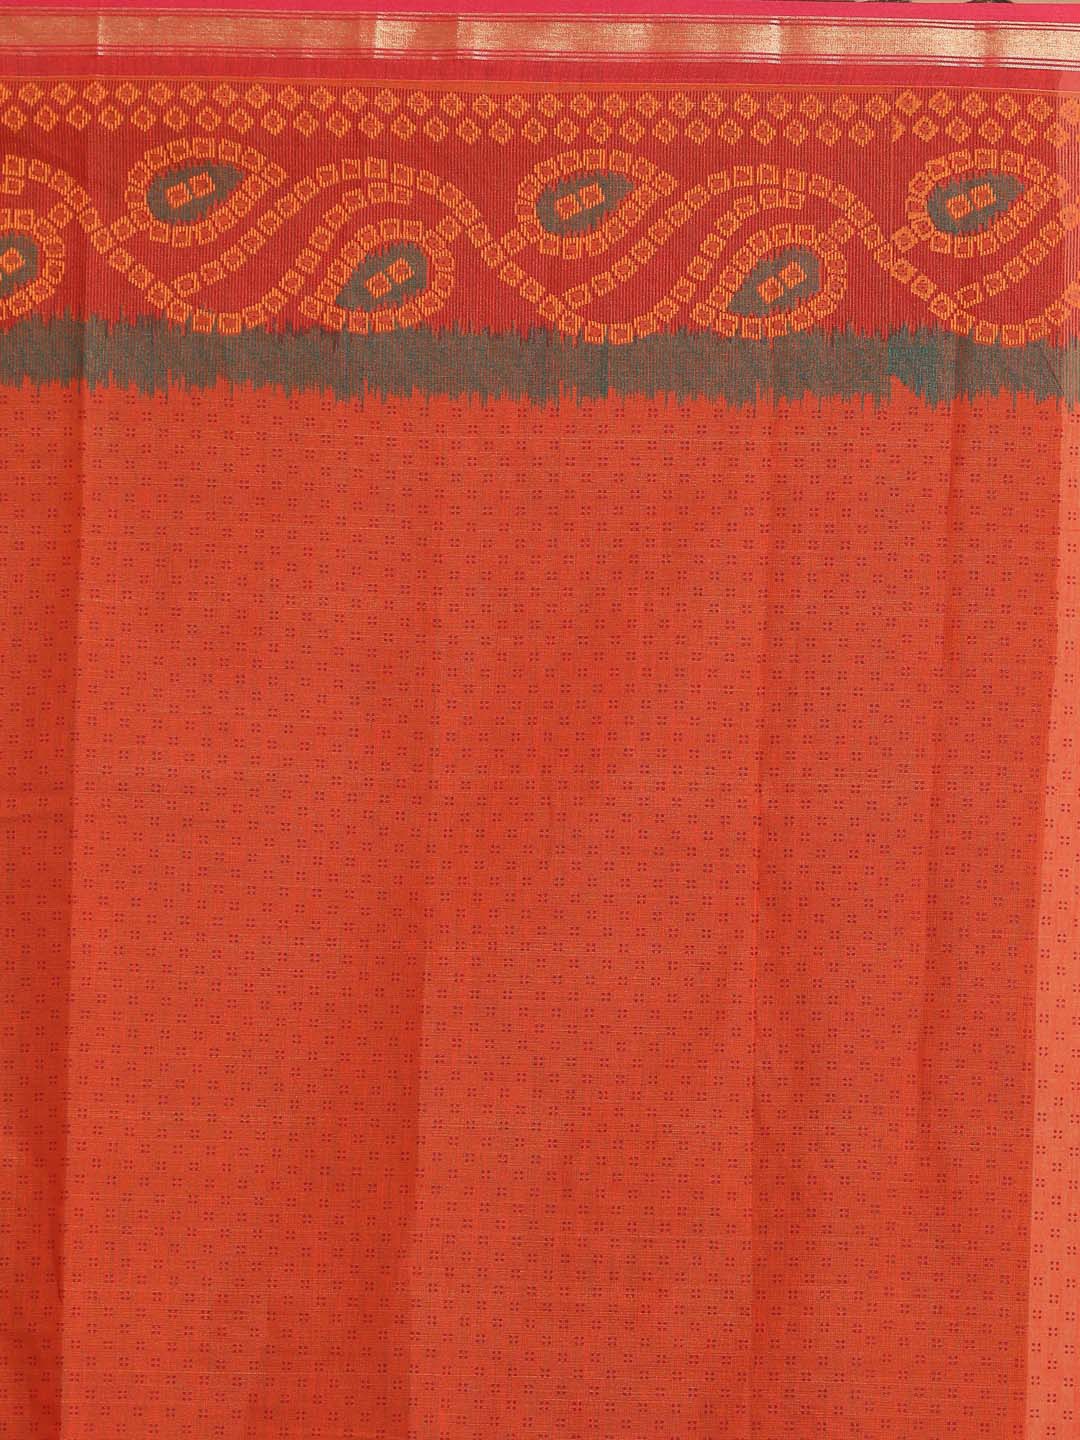 Indethnic Printed Cotton Blend Saree in Rust - Saree Detail View